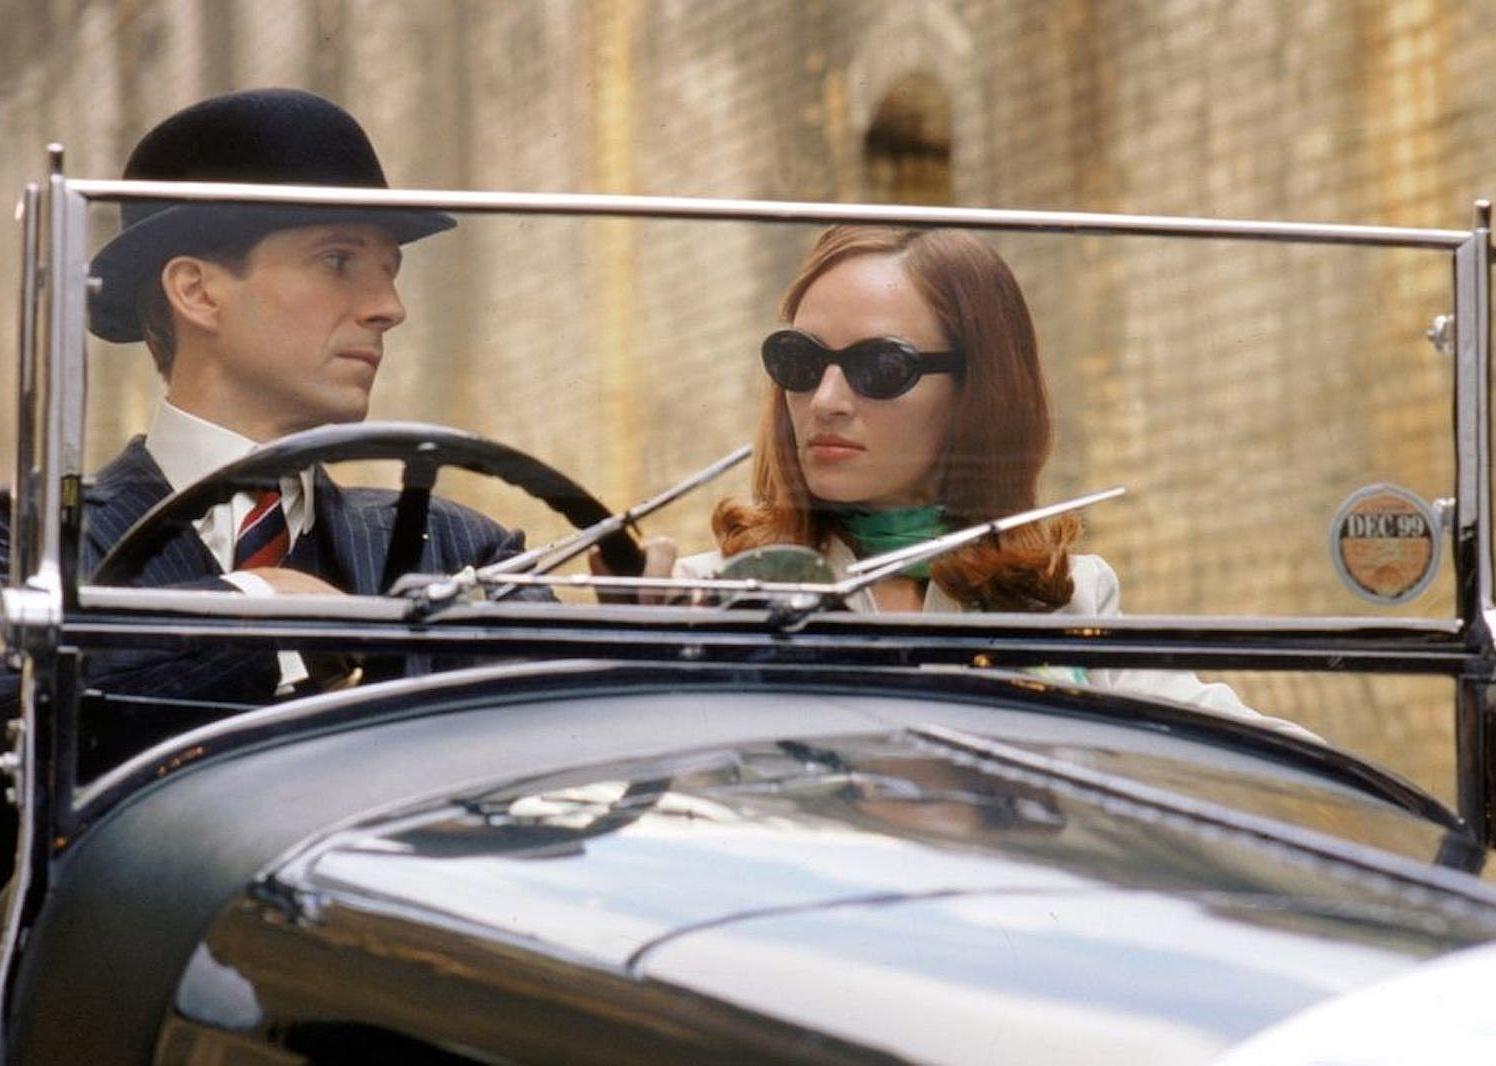 Ralph Fiennes in a pinstripe suit and top hat and Uma Thurman in cat eye glasses driving in a classic car.